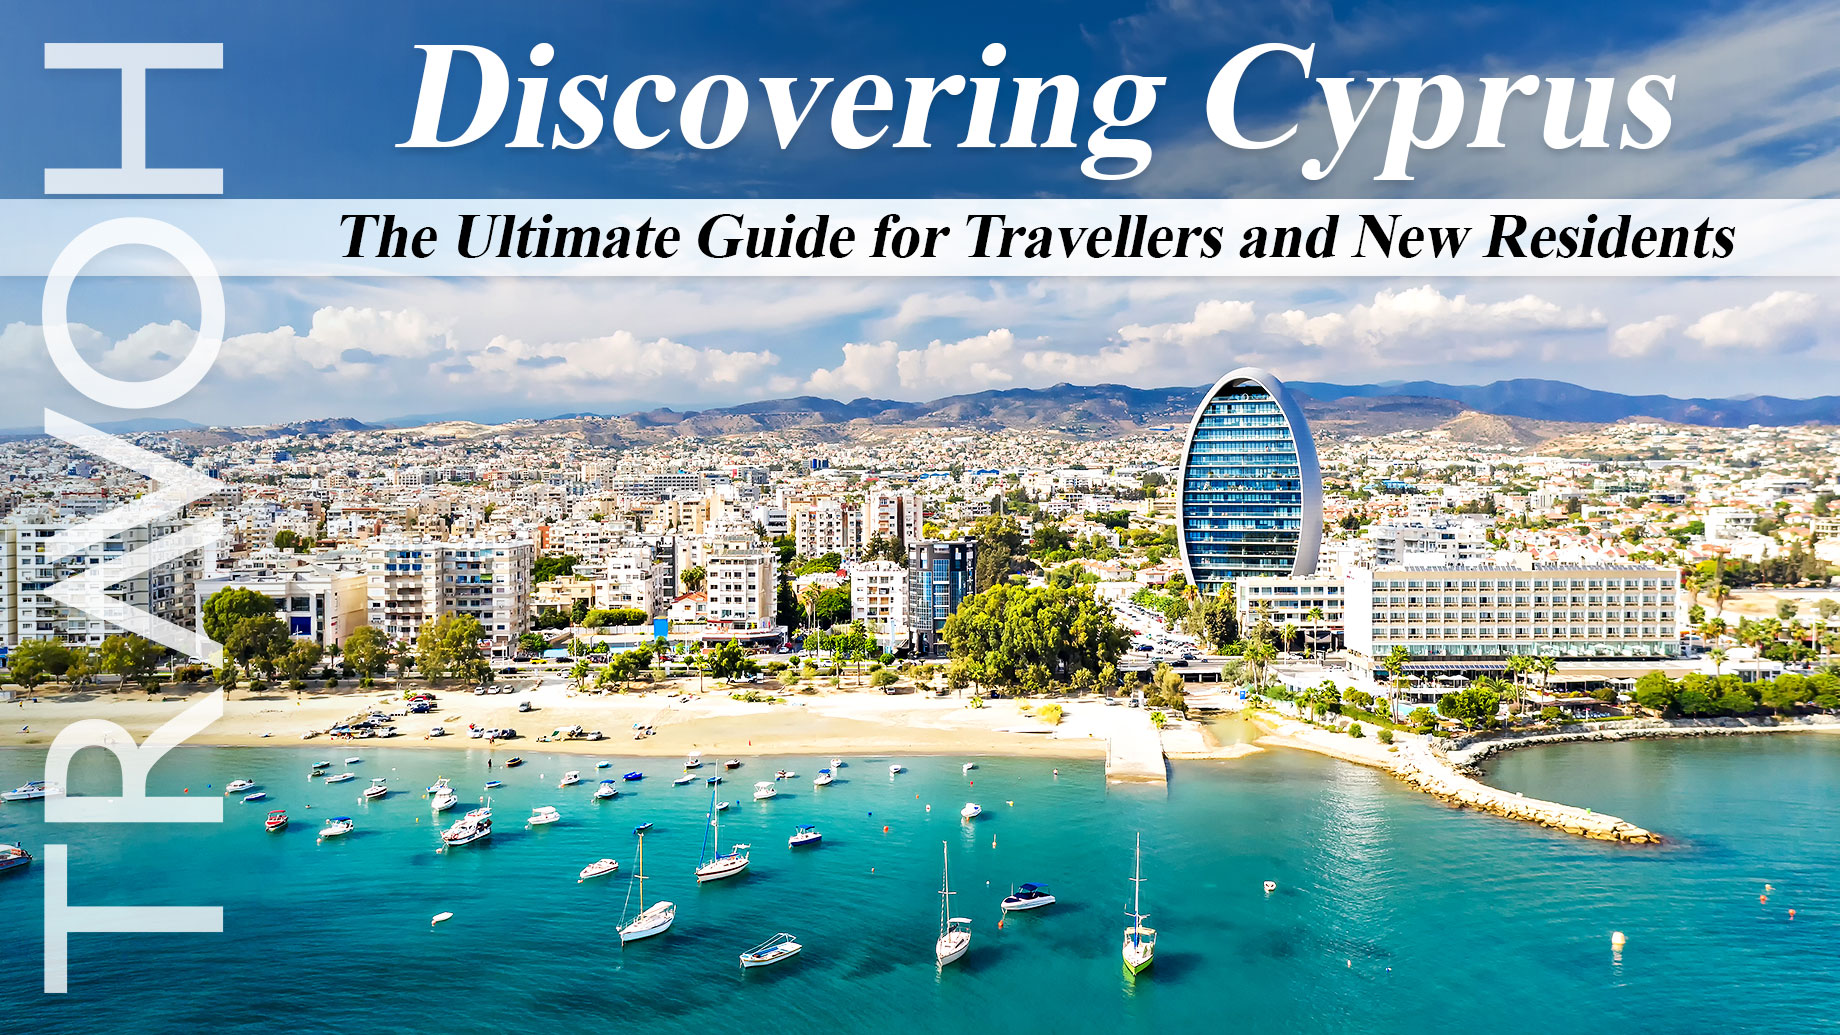 Discovering Cyprus: The Ultimate Guide for Travellers and New Residents